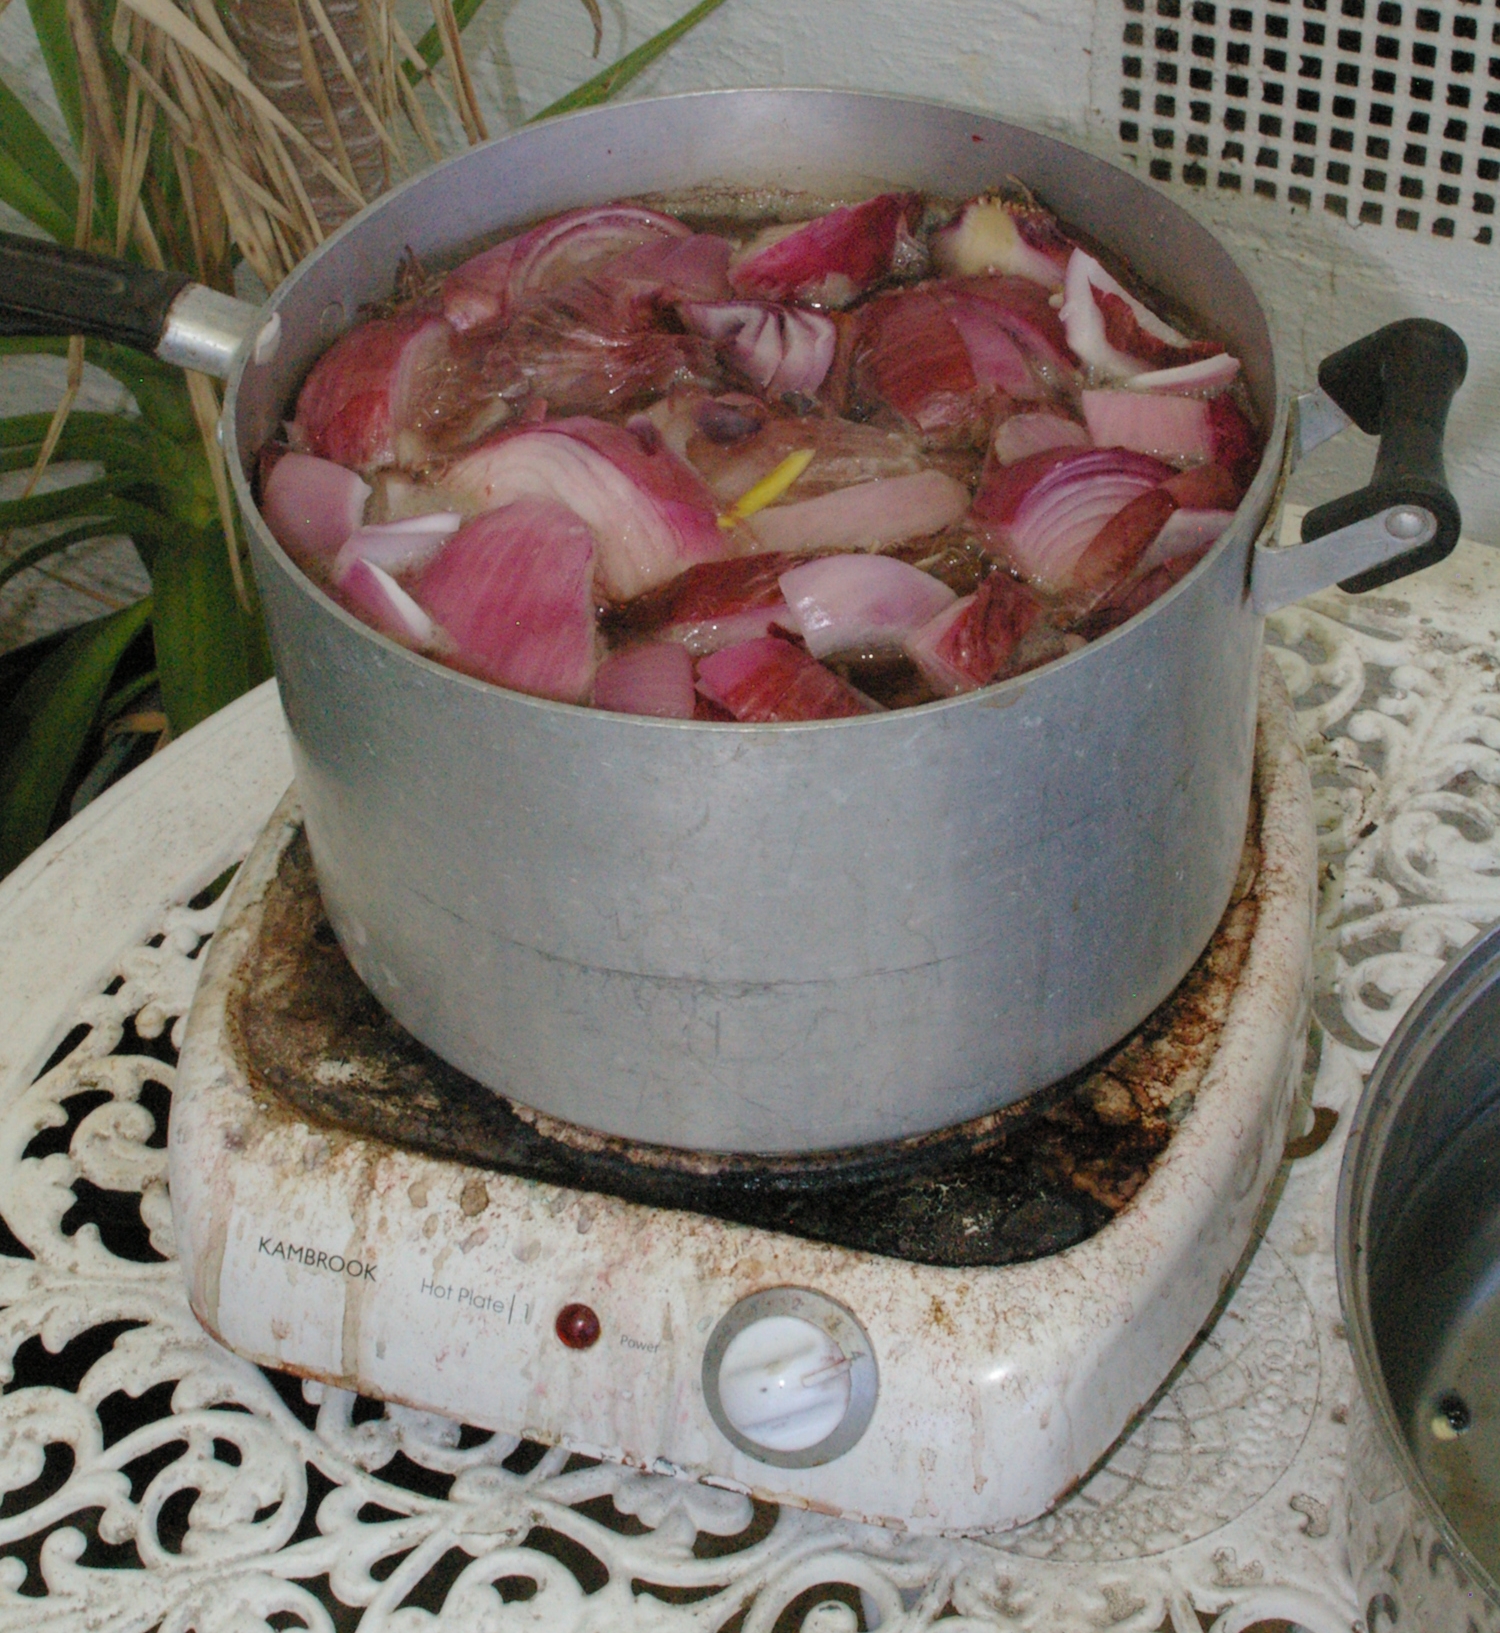 Boiling up red onions.